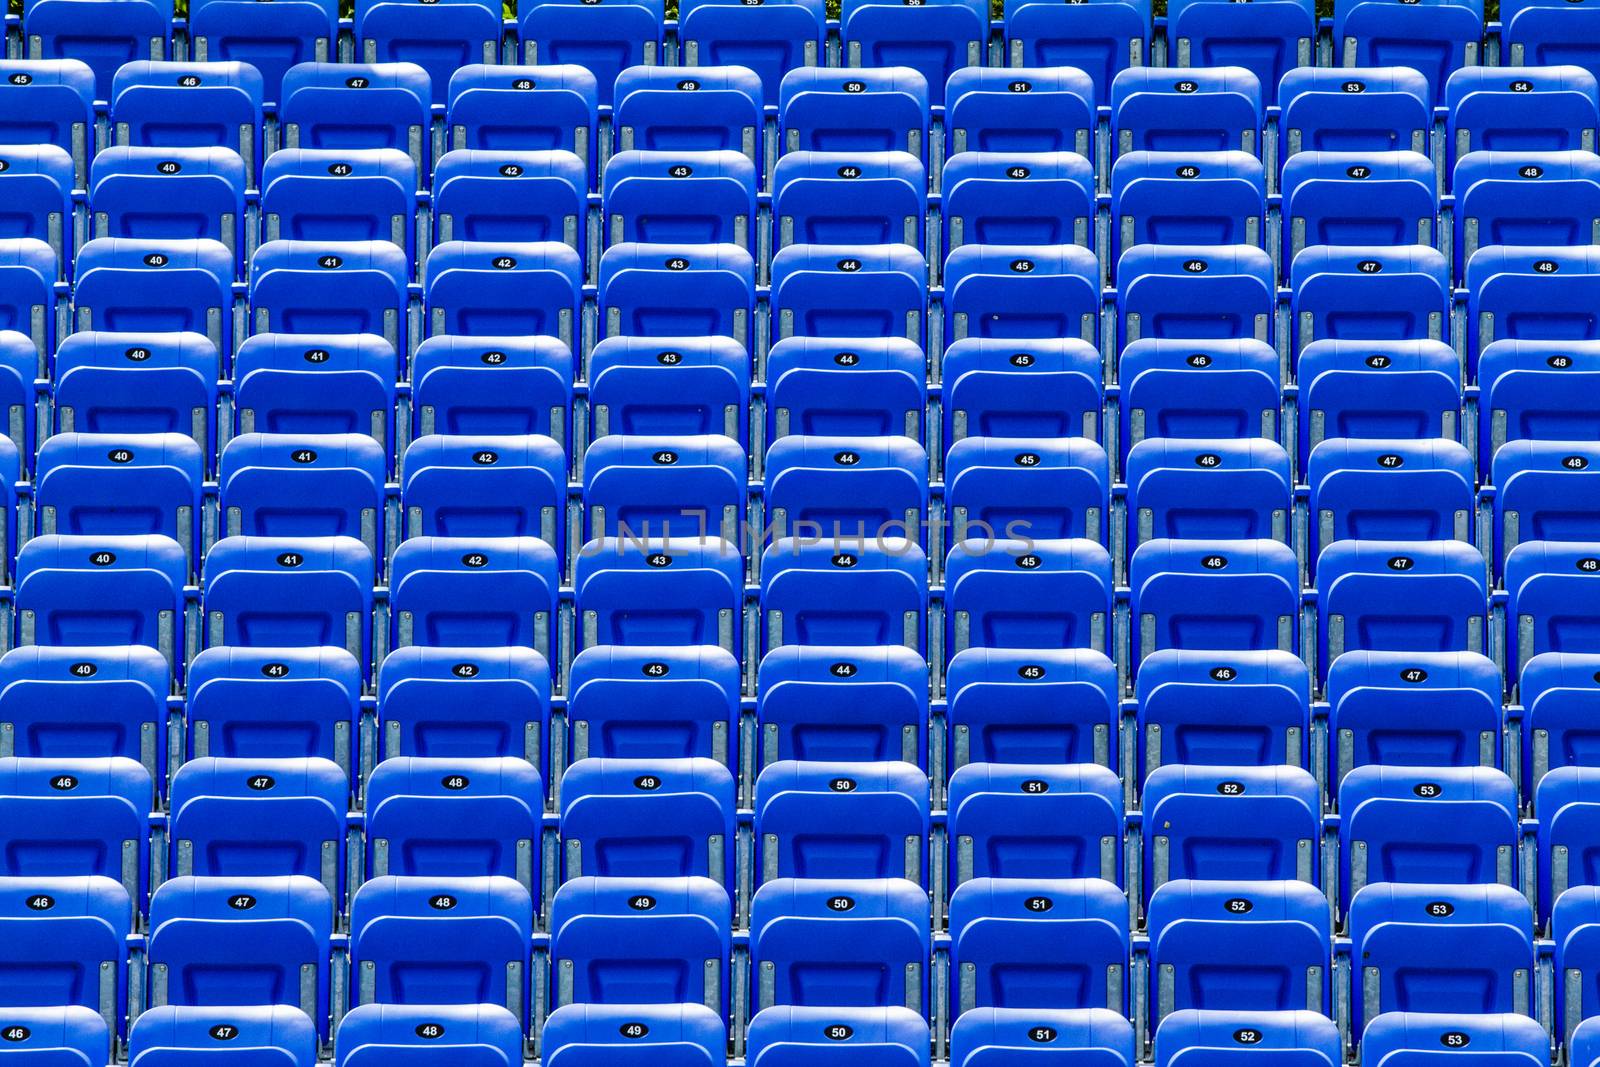 Empty Blue Bleachers Outdoors with Numbers - Nobody